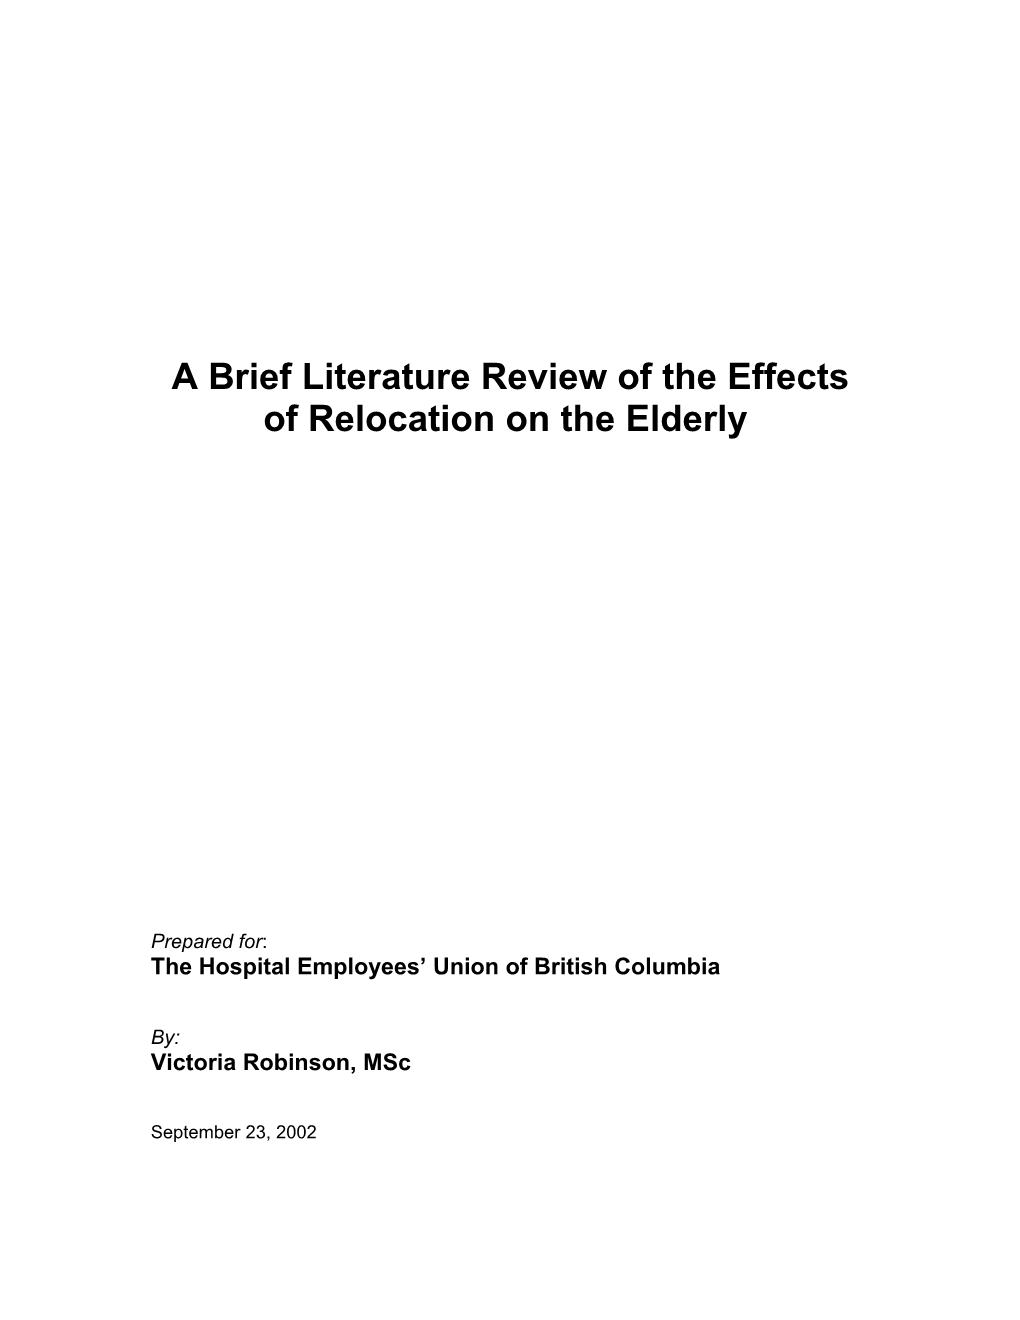 A Brief Literature Review of the Effects of Relocation on the Elderly